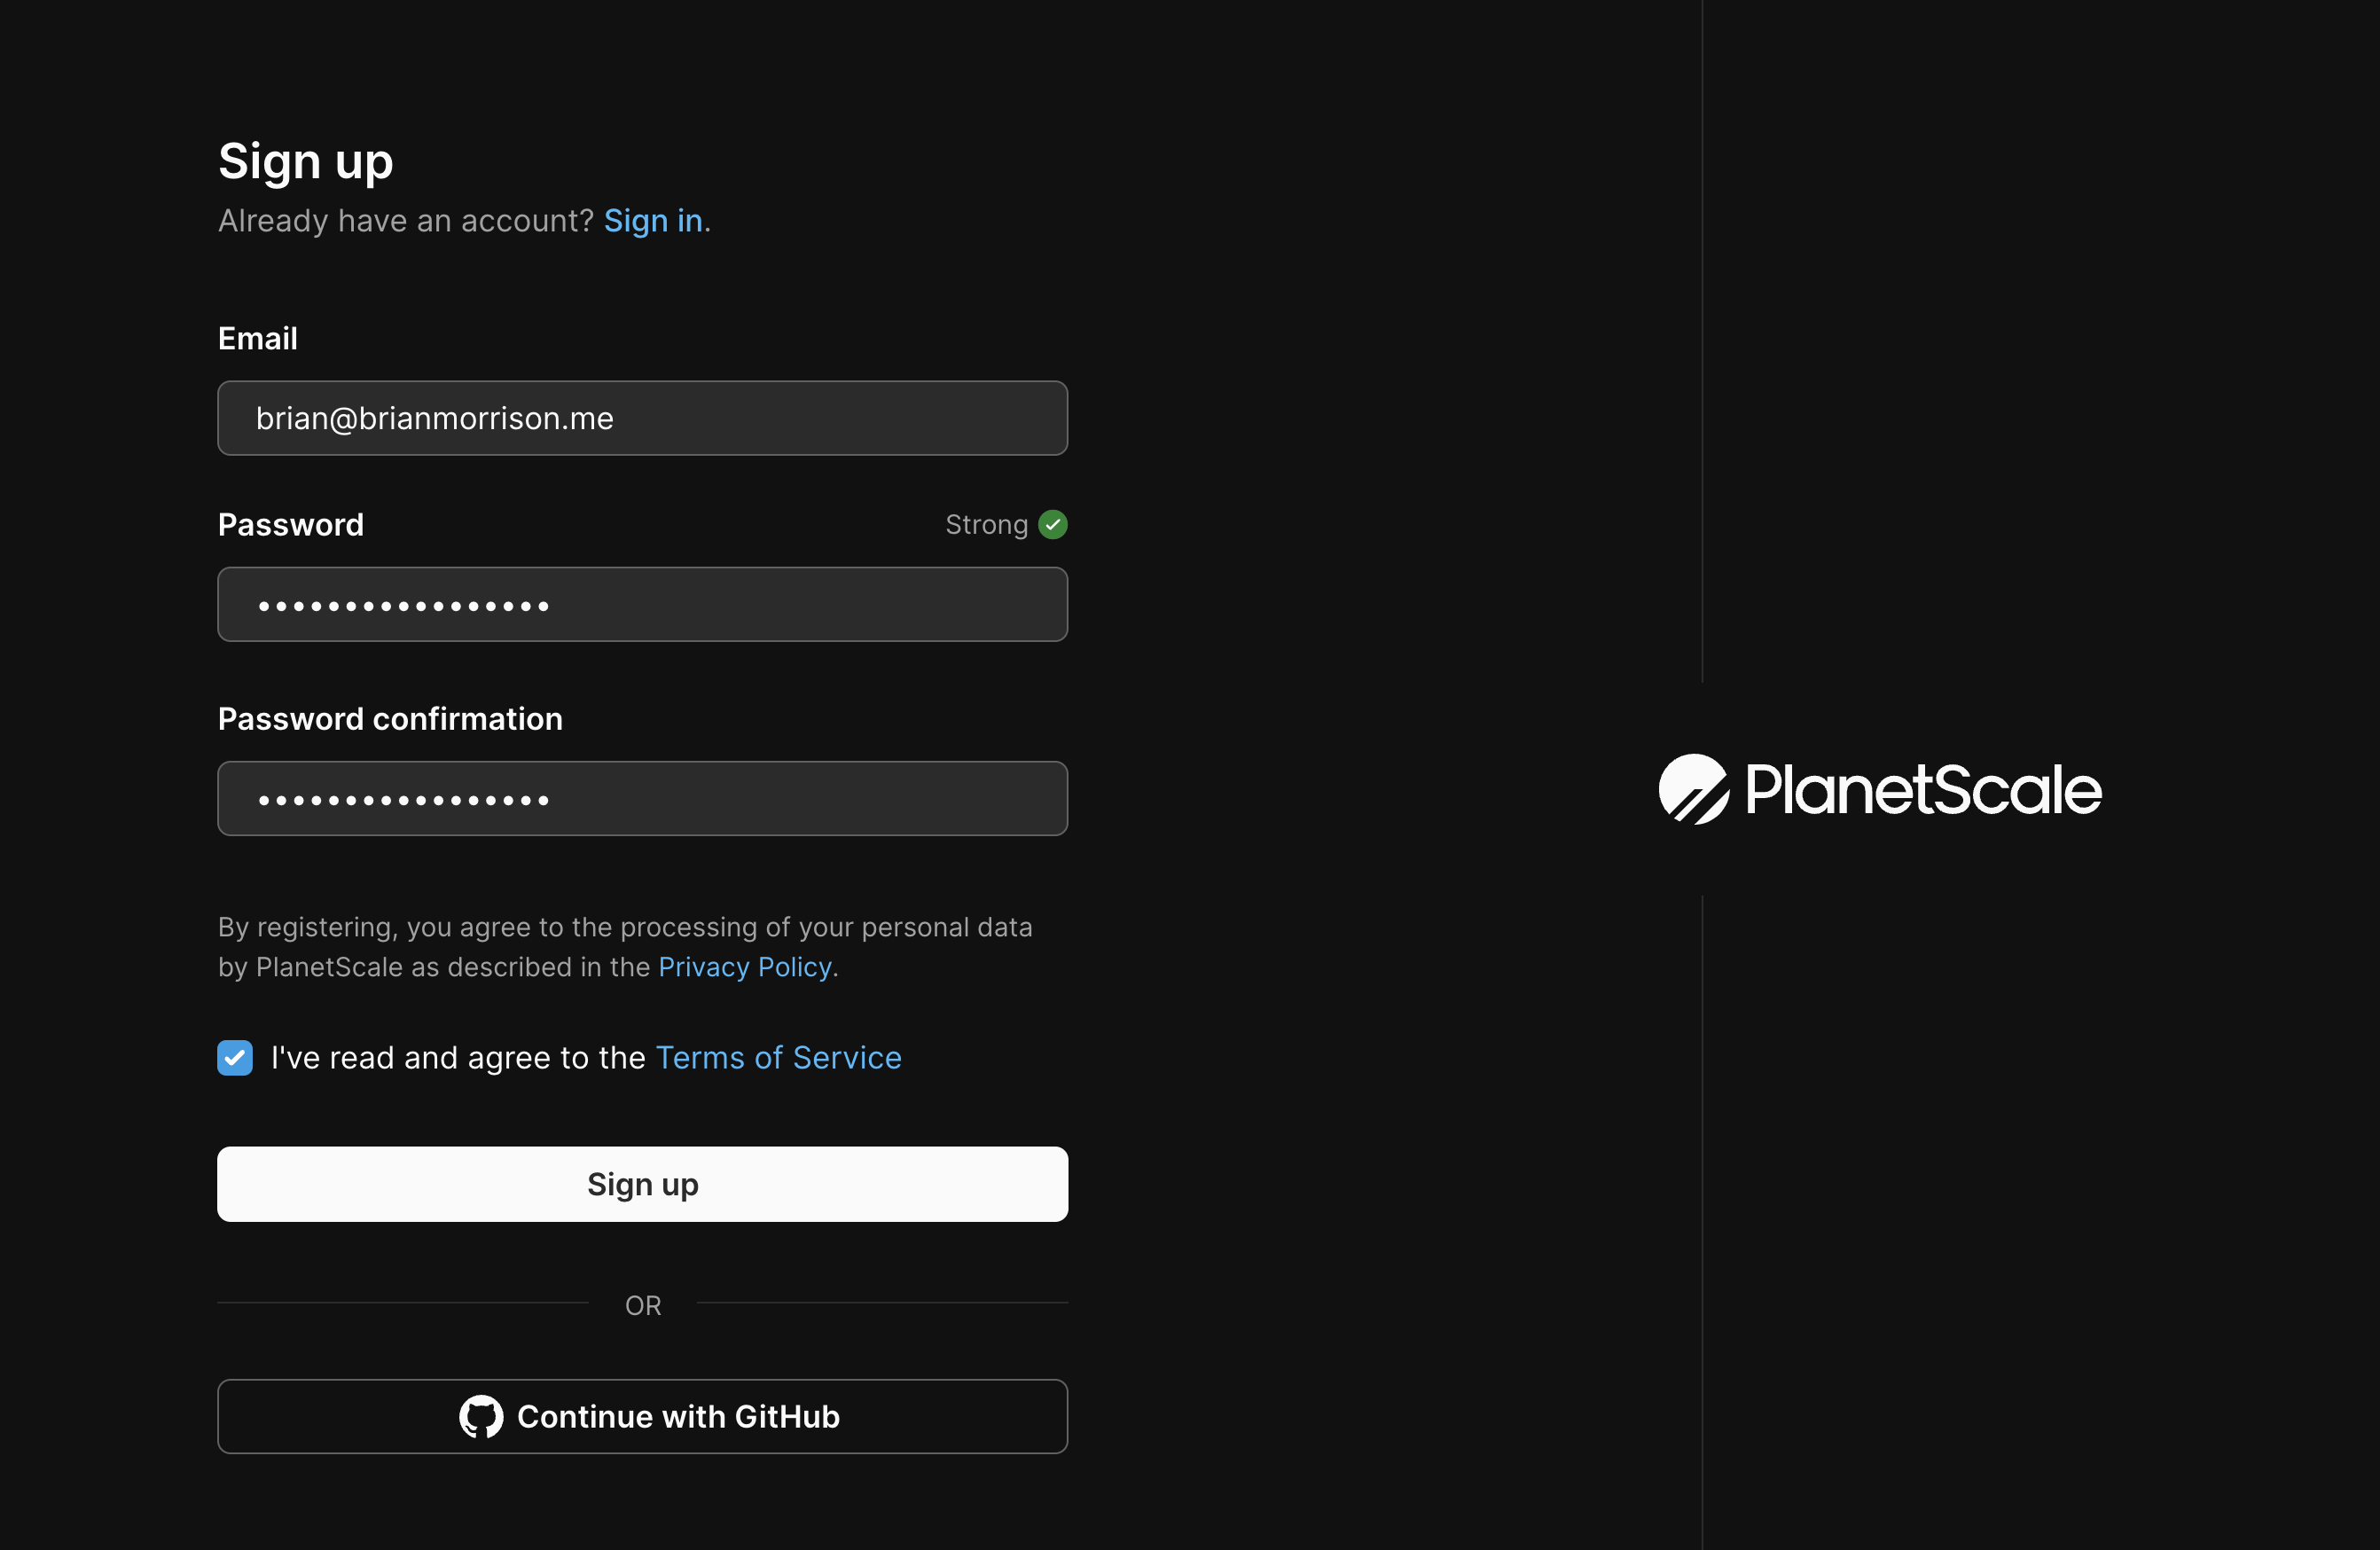 The completed sign up screen on PlanetScale